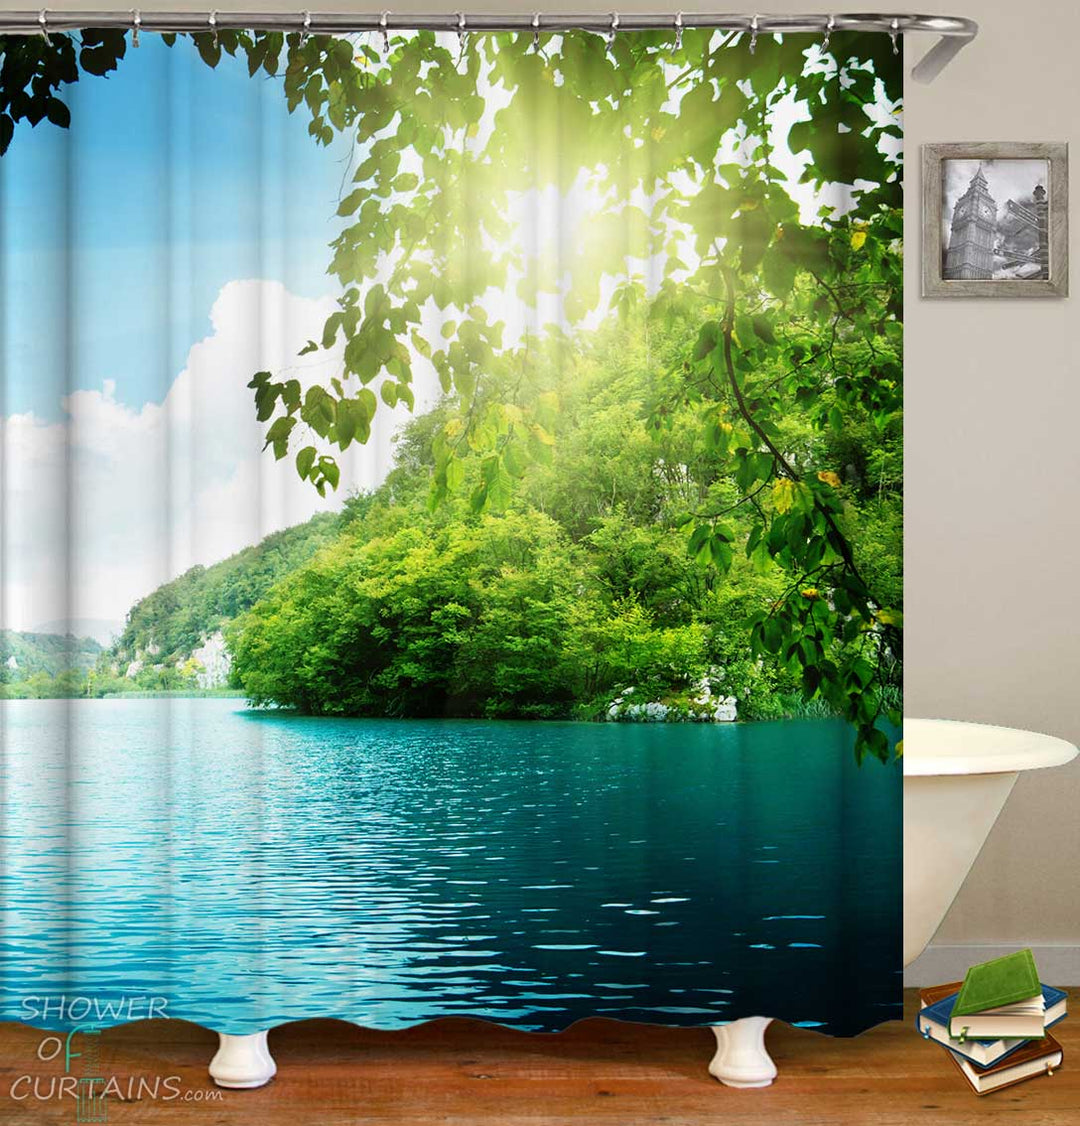 Shower Curtains with Green Nature Heaven